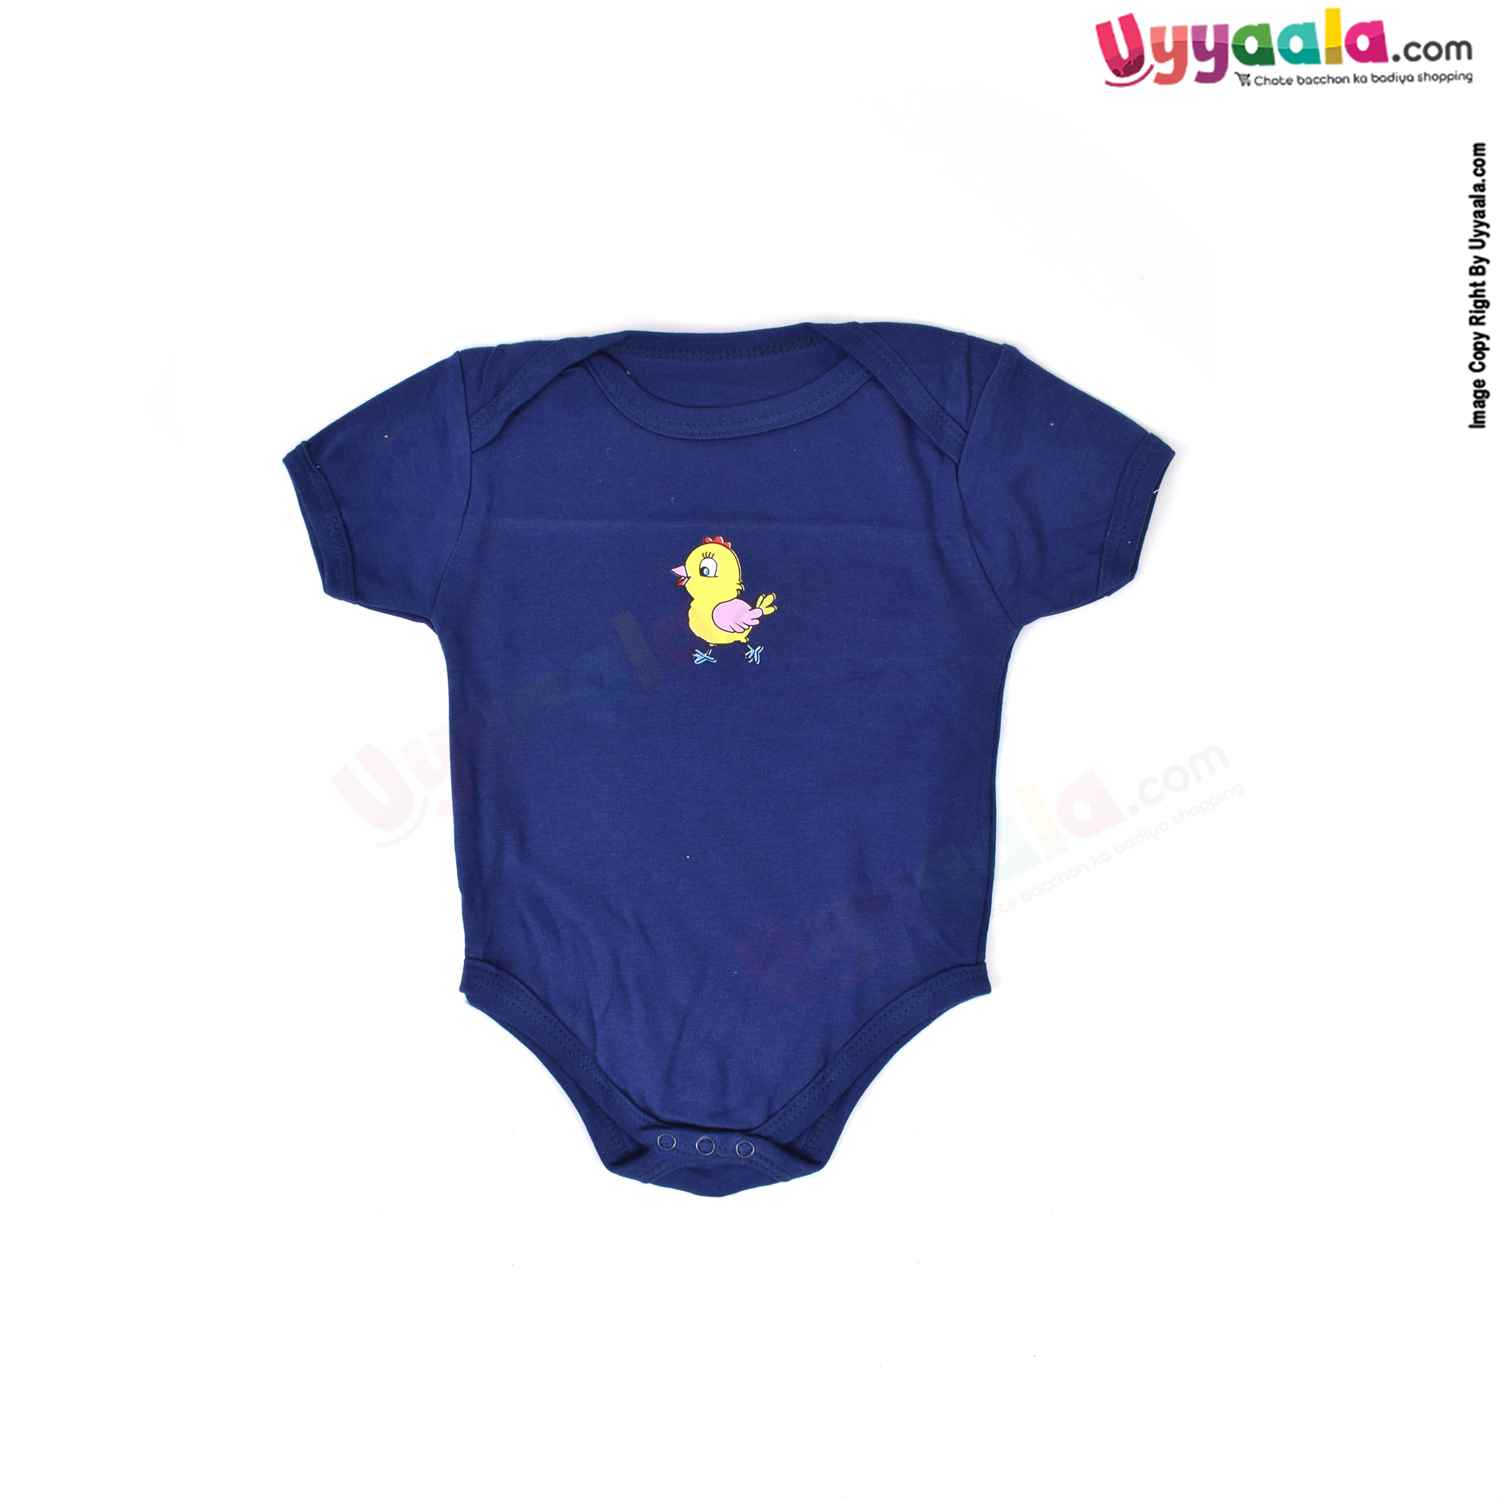 Precious One Short Sleeve Body Suit 100% Soft Hosiery Cotton - Navy Blue with Chick Print (9-12M)